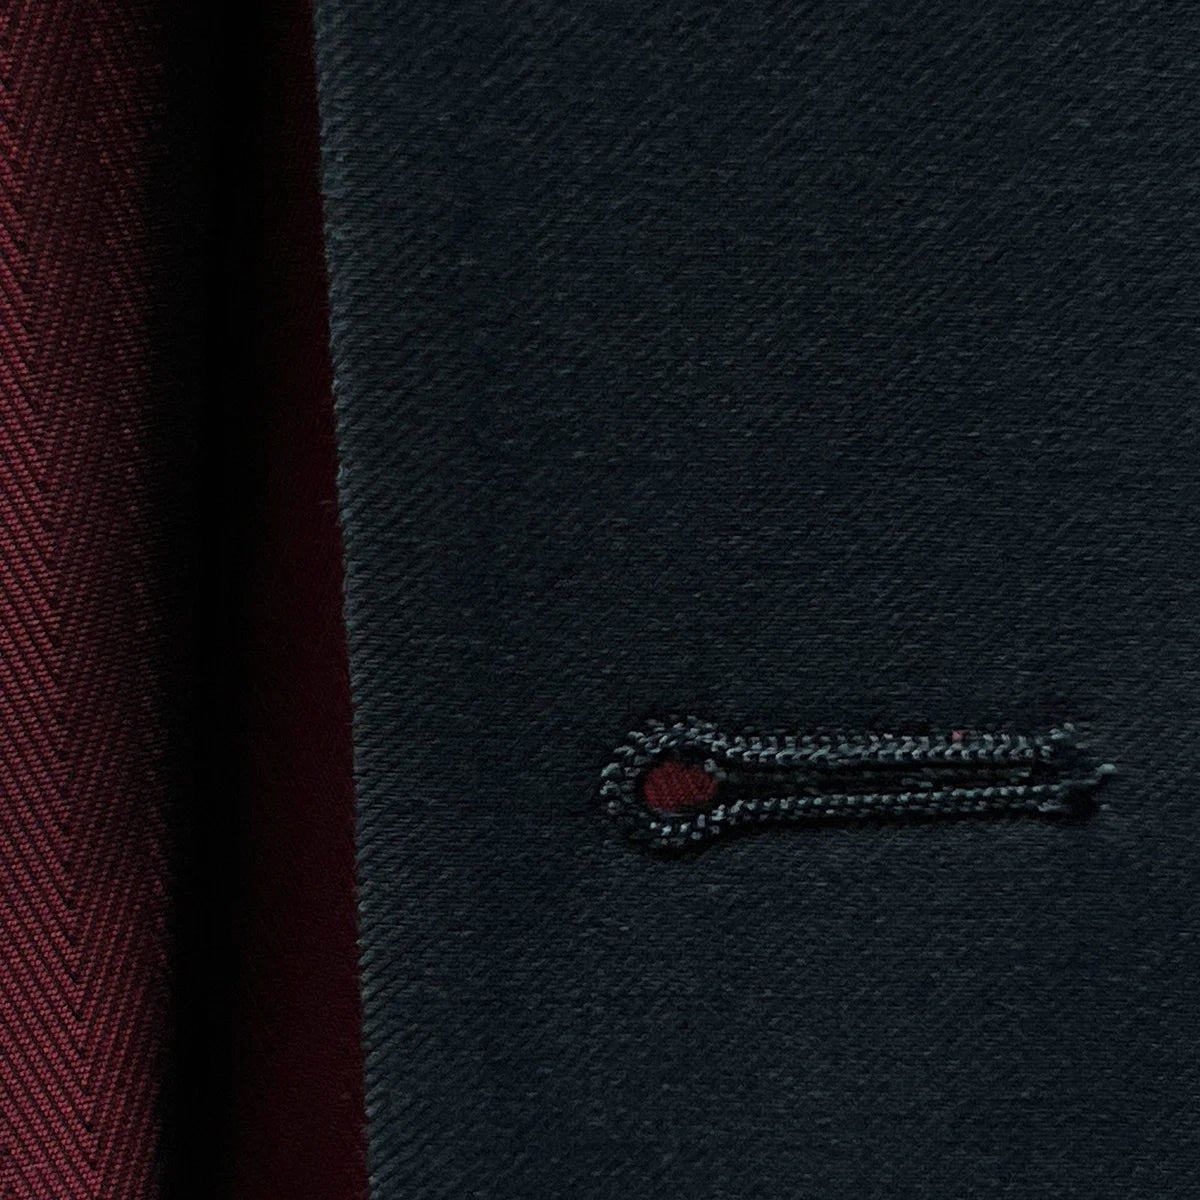 Macro shot of the buttonhole stitching, highlighting the craftsmanship and attention to detail.